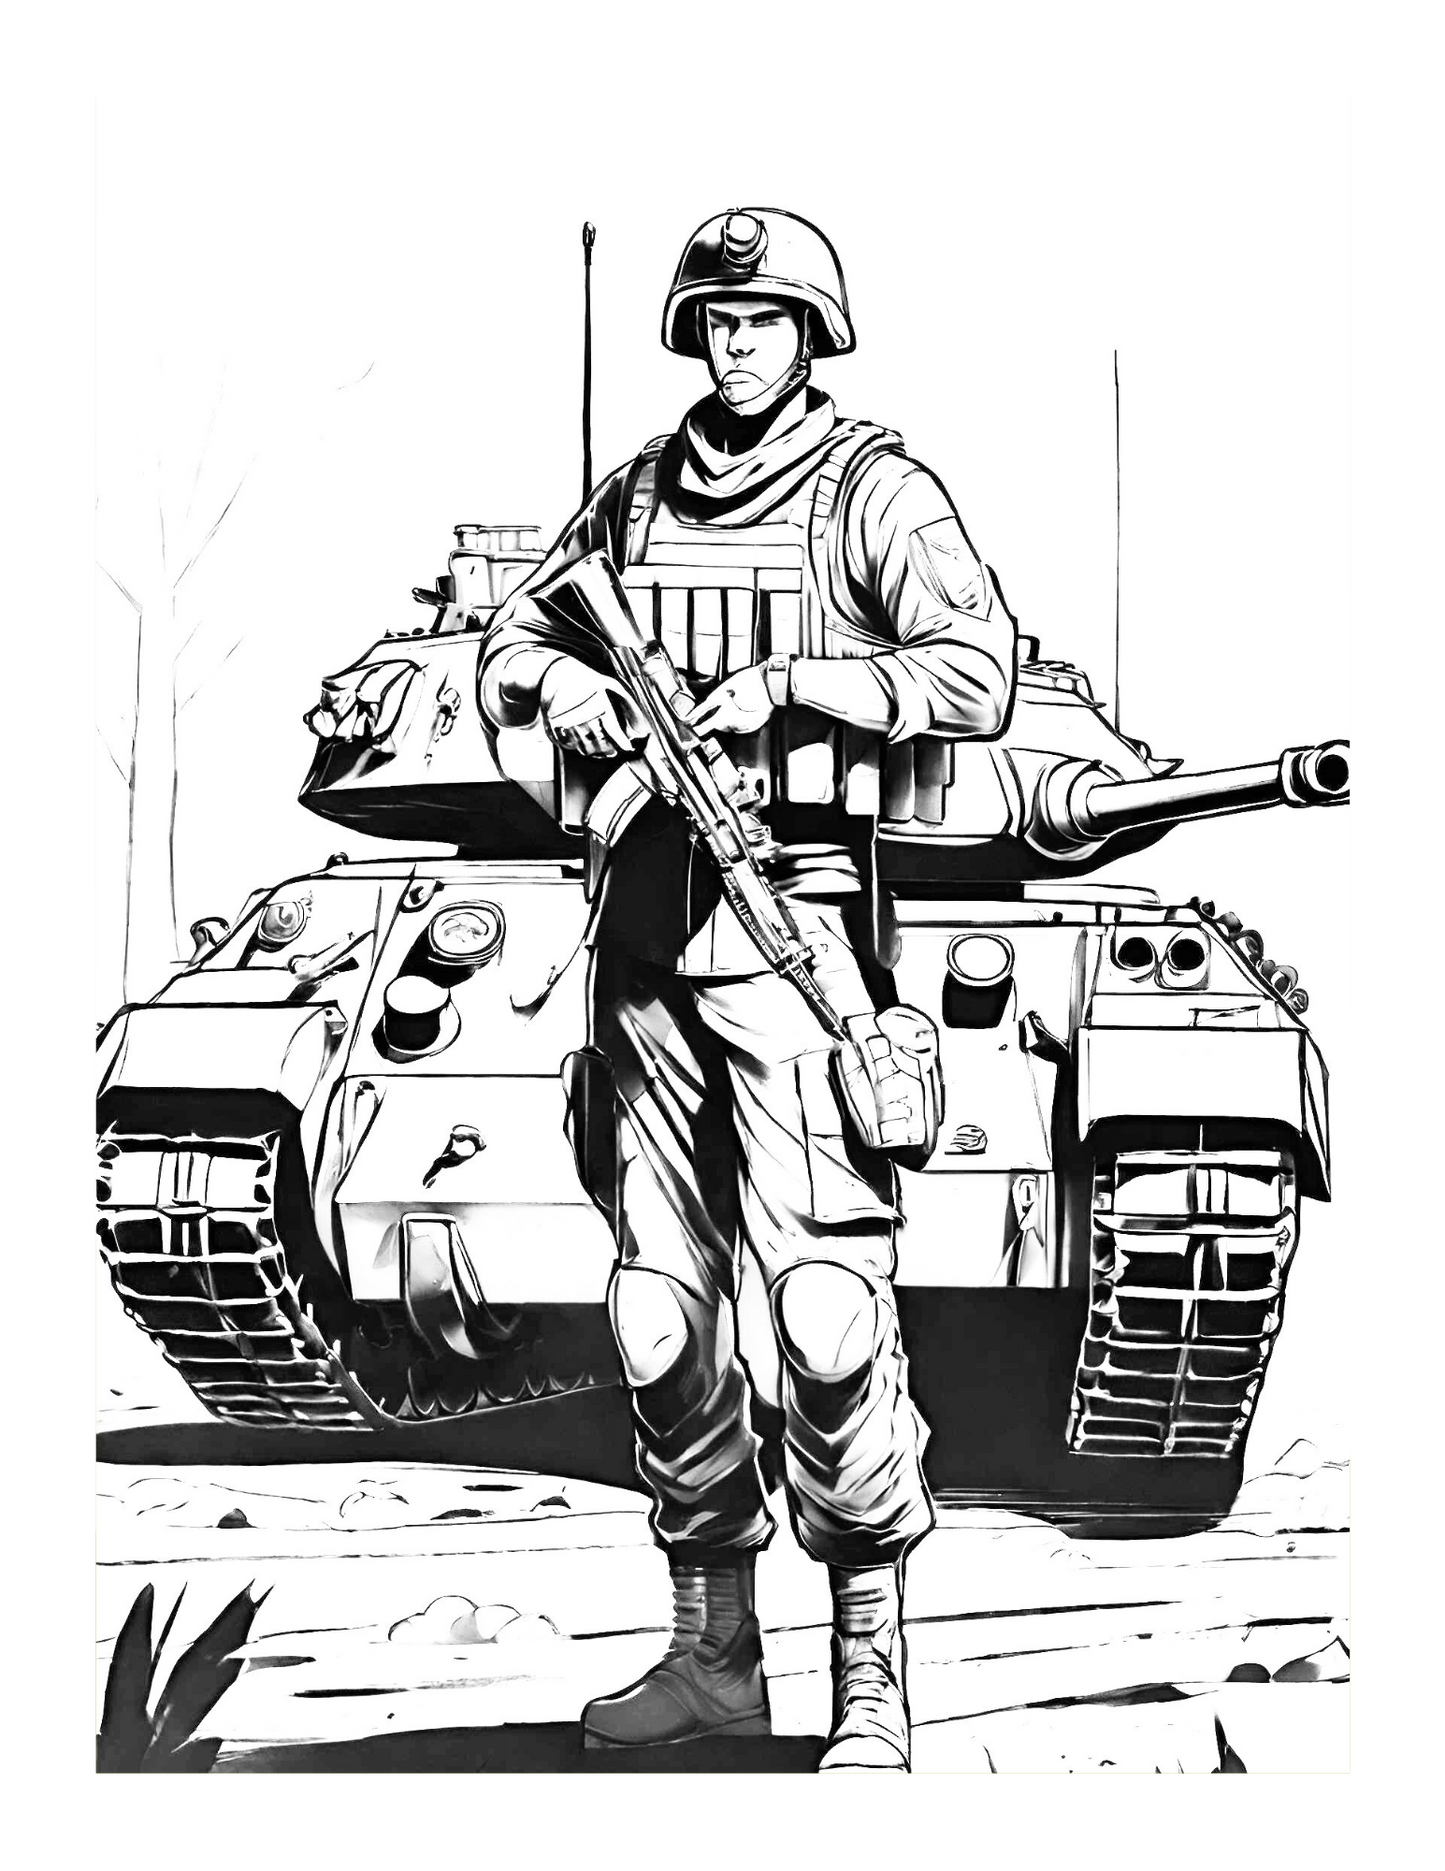 Military Army Soldier Coloring Book For Kids Military Coloring Pages Army Coloring Books Boys US Army Coloring Book Army Man Coloring Book